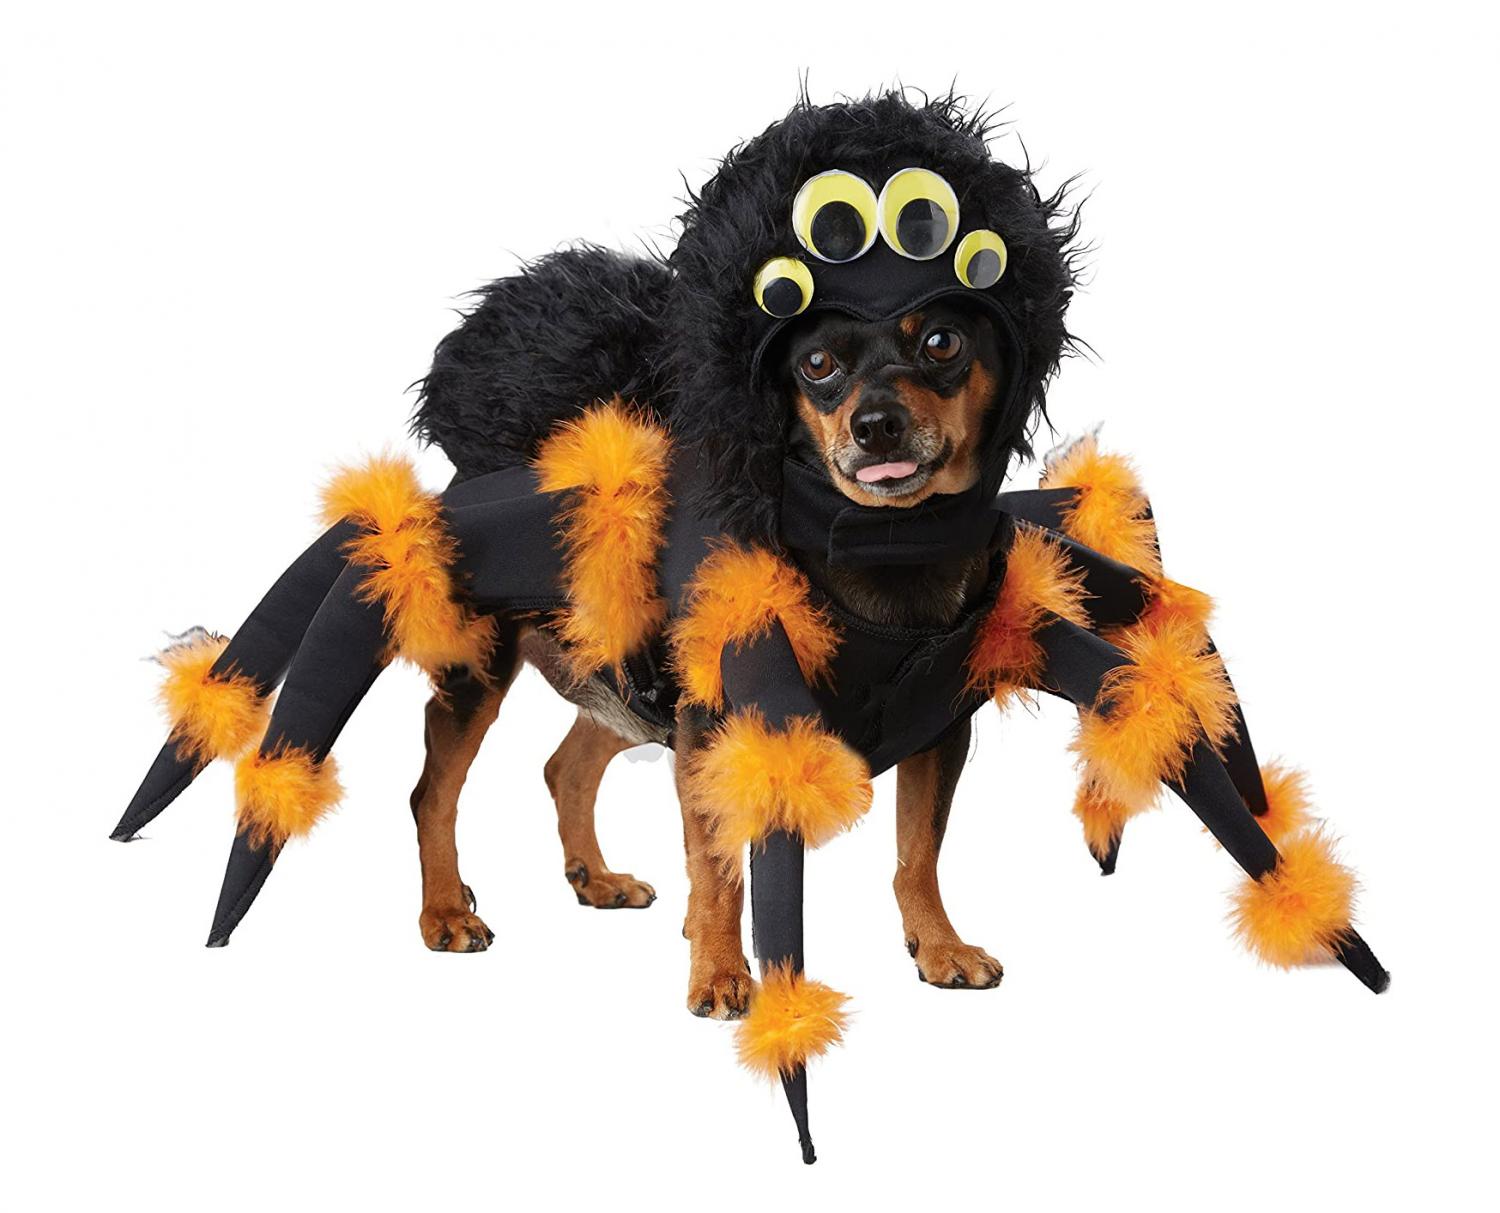 Tarantula Dog Costume Turns Your Dog Into a Giant Spider For Halloween